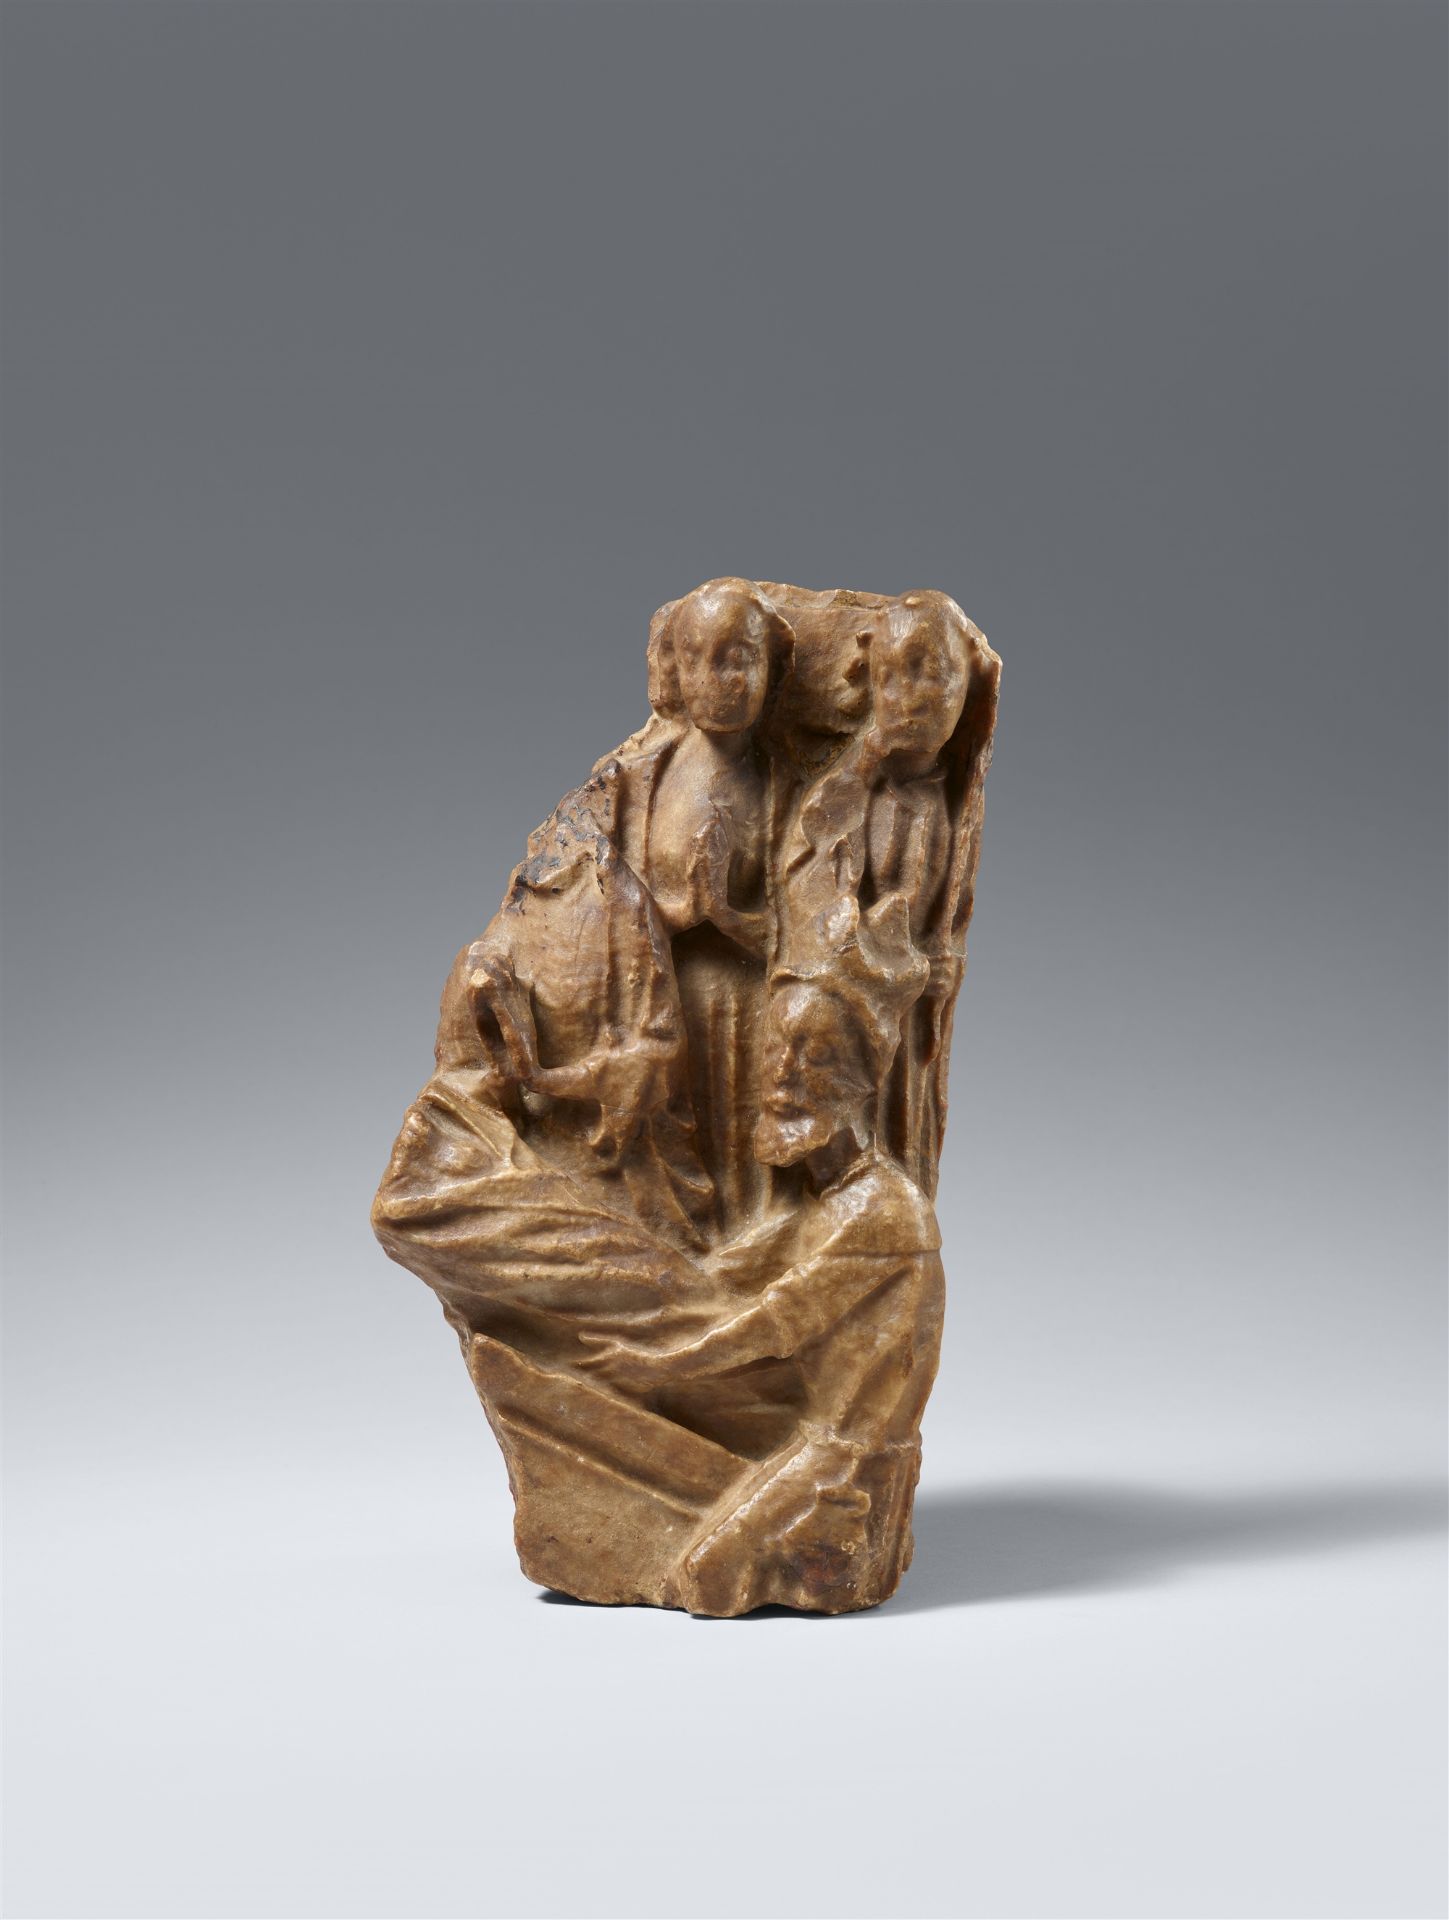 A fragment of a 15th century Nottingham alabaster relief of the Entombment